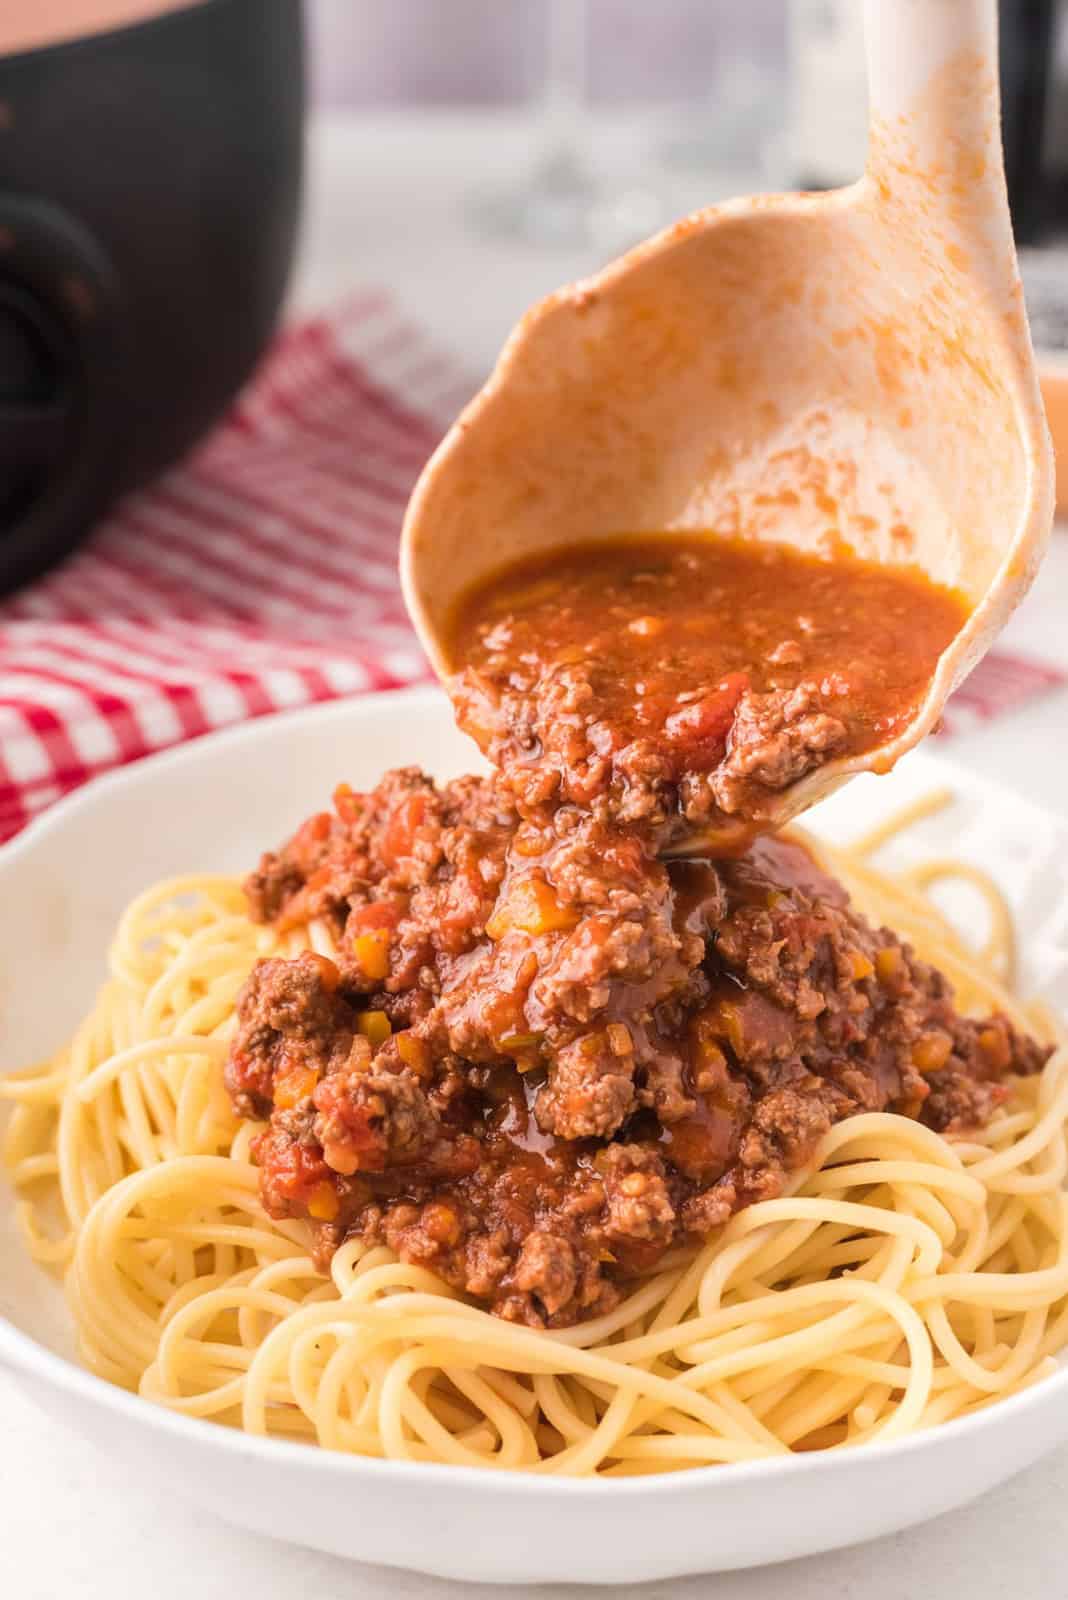 Ladle pouring Bolognese Sauce over pasta